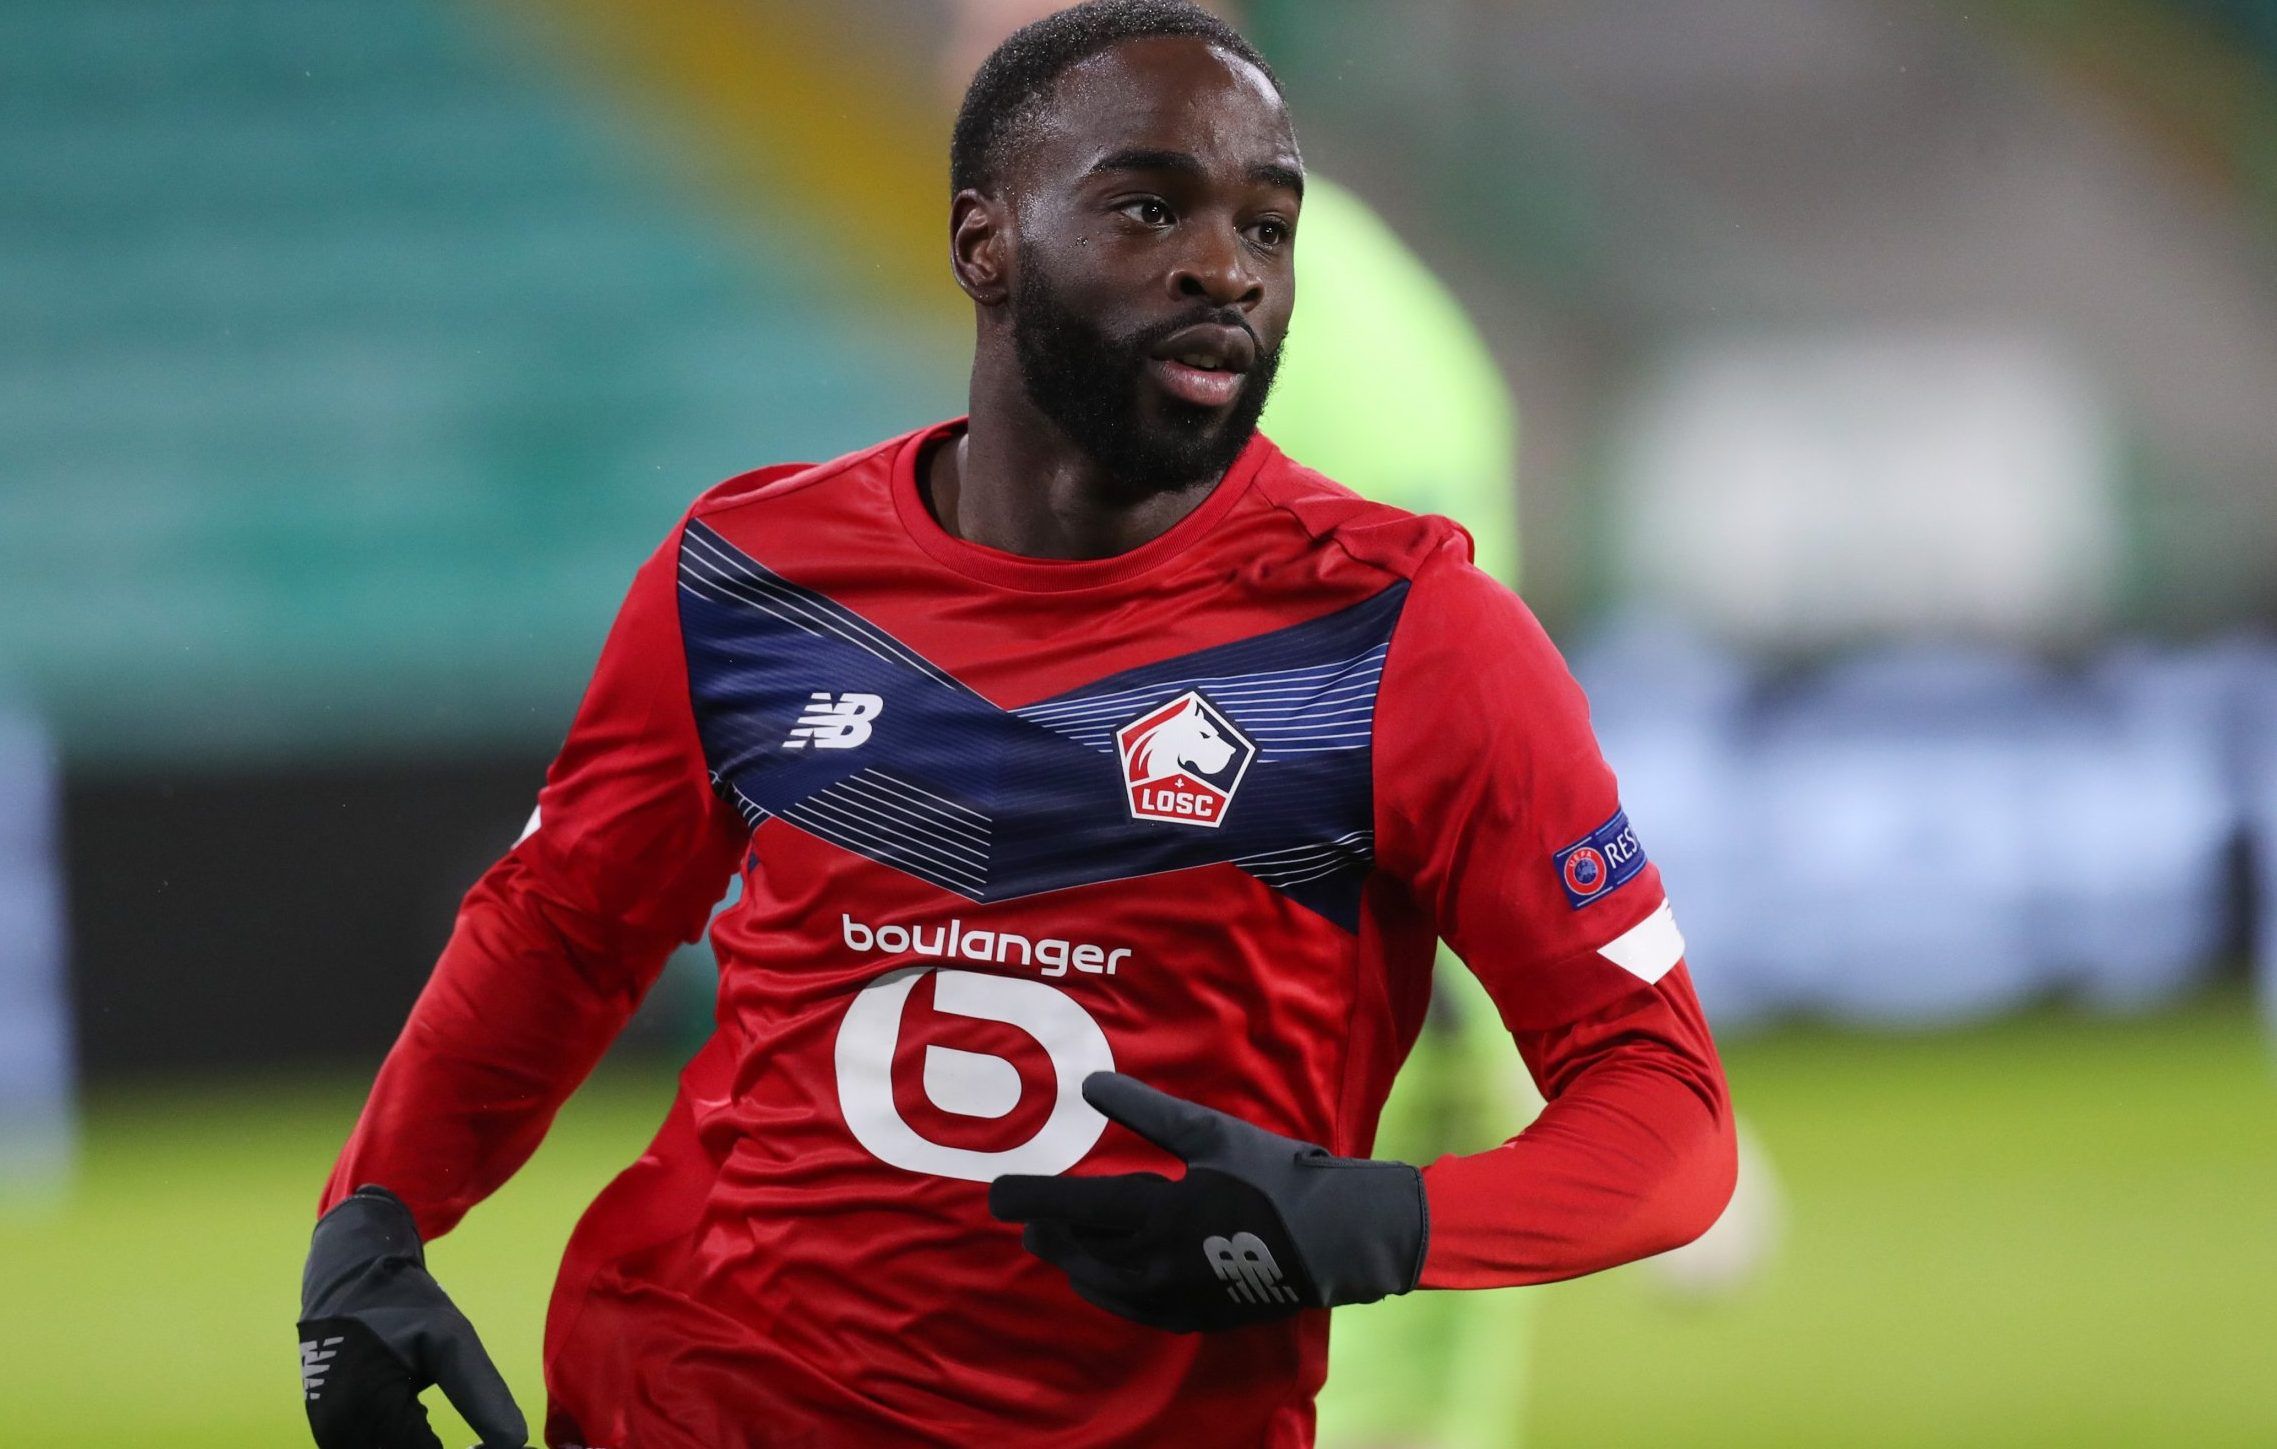 lille attacker jonathan ikone celebrates scoring against celtic in the europa league